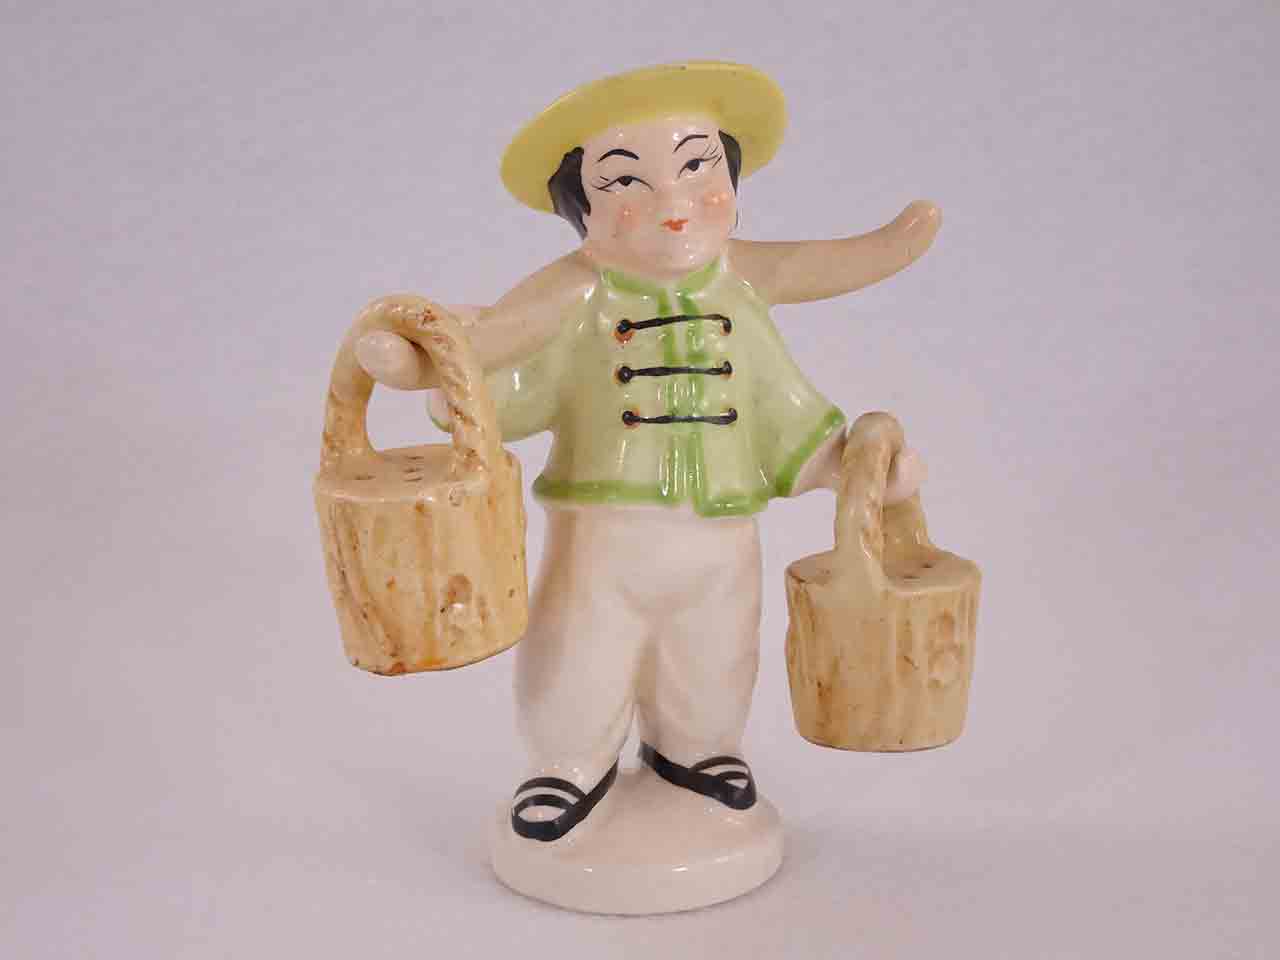 Occupied Japan Japanese Asian boy carrying pails - hanger salt and pepper shakers